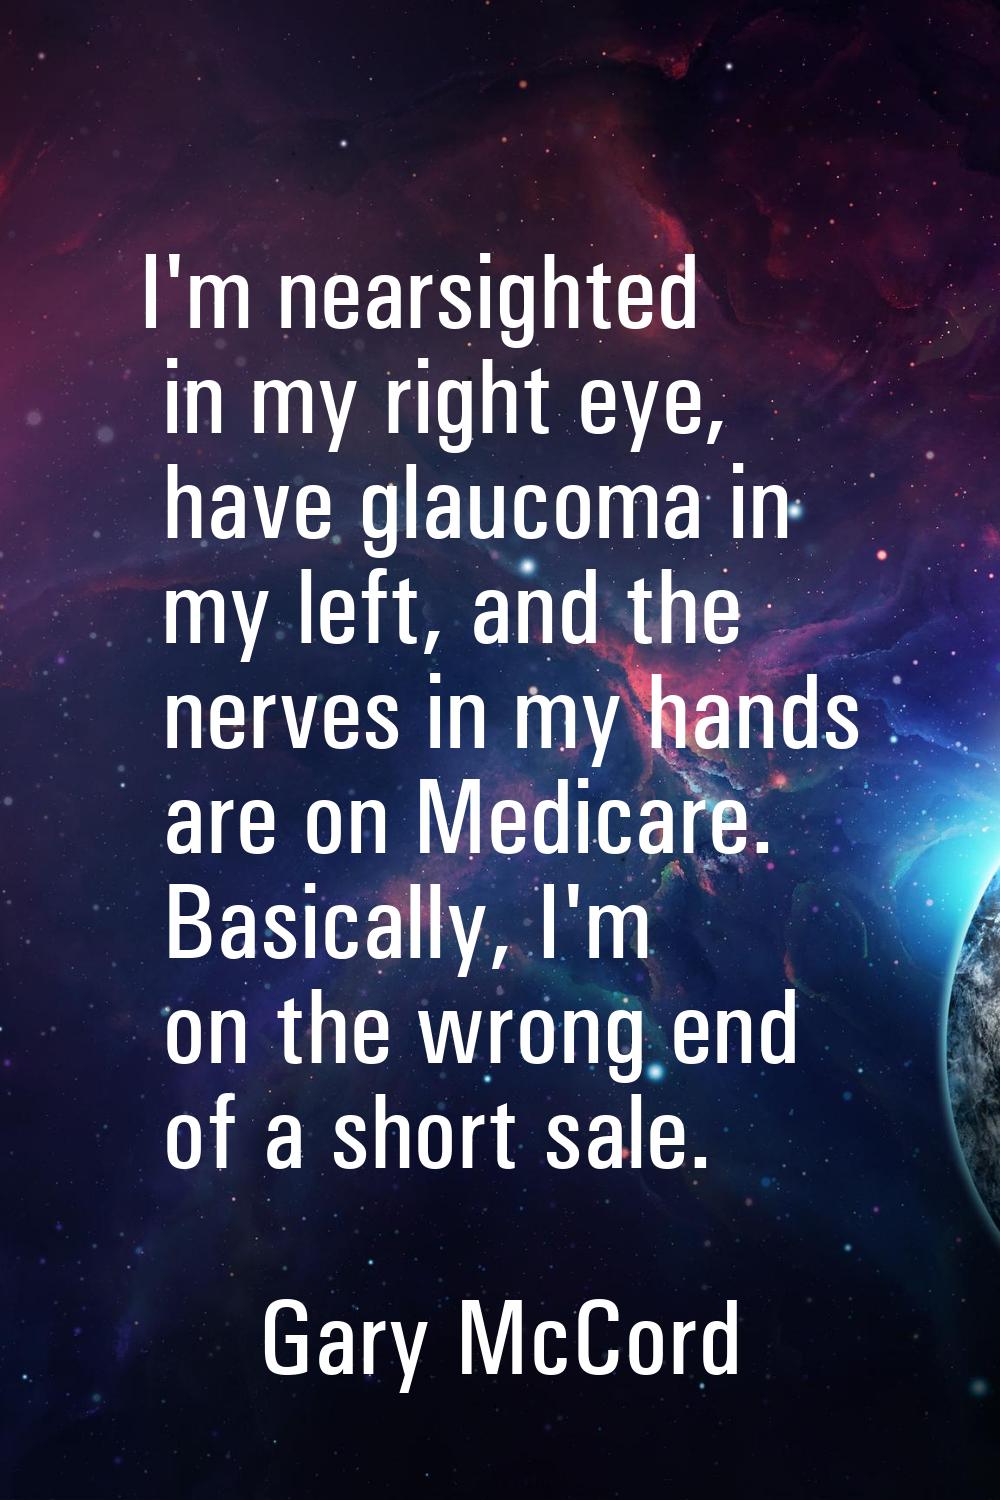 I'm nearsighted in my right eye, have glaucoma in my left, and the nerves in my hands are on Medica